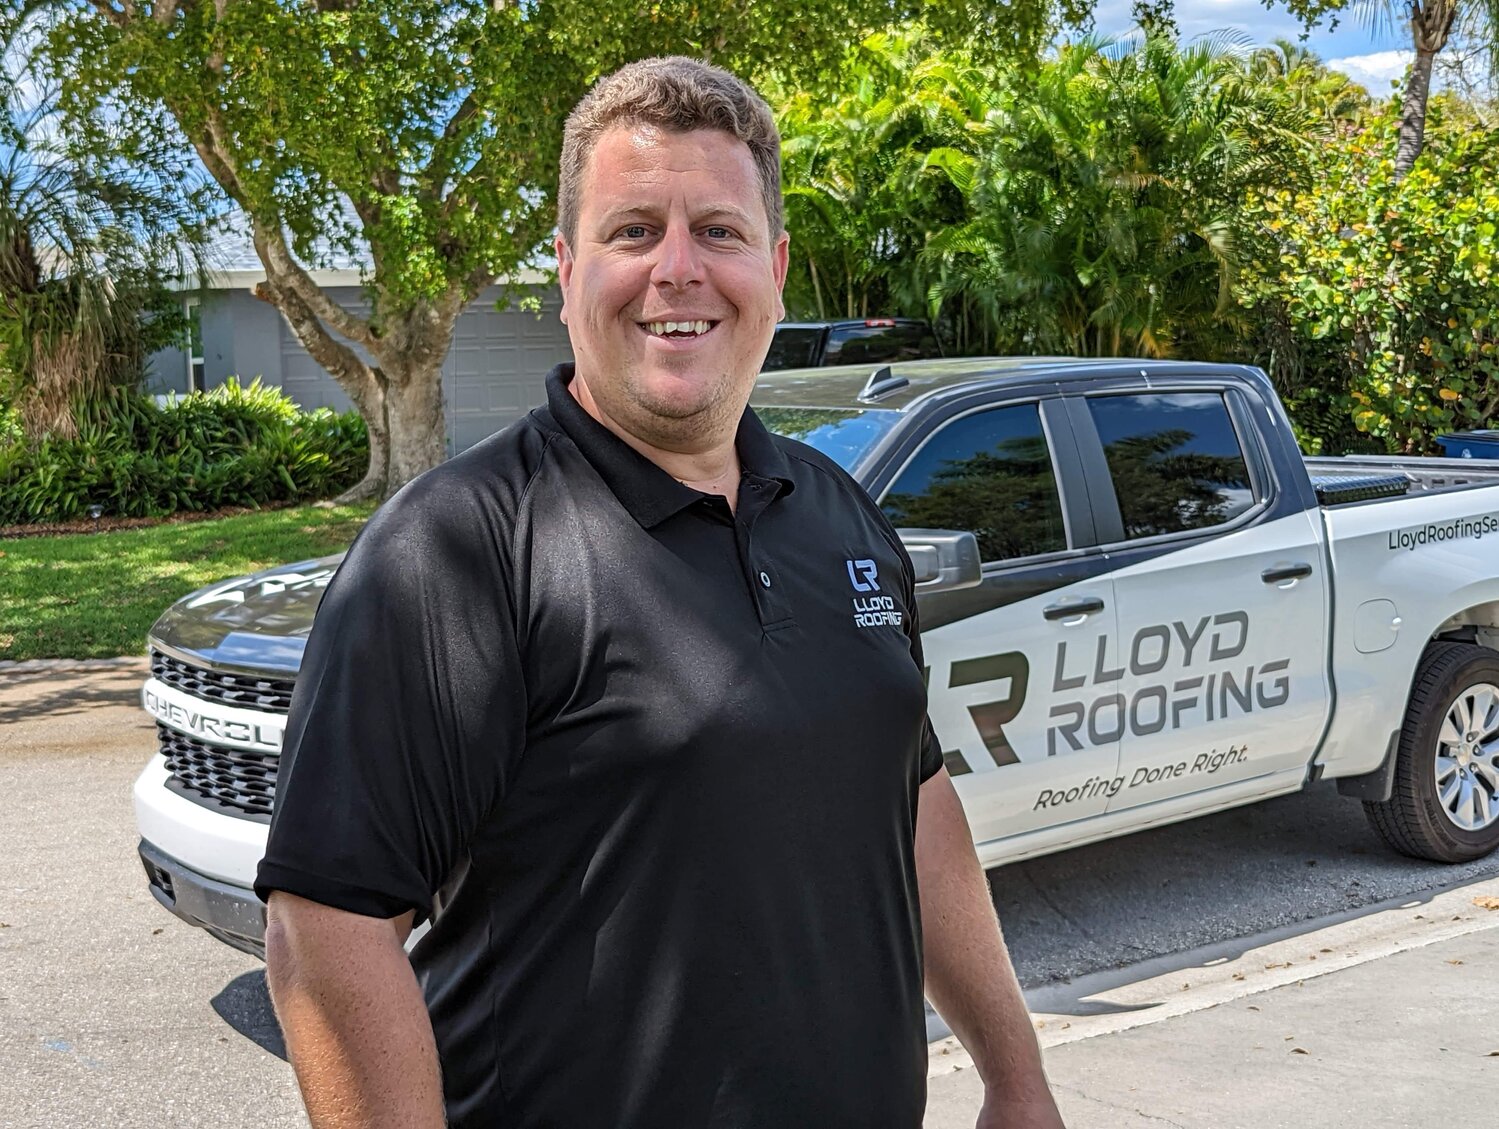 Rast Bryant, General Manager of Lloyd Roofing, Southwest Florida Division.